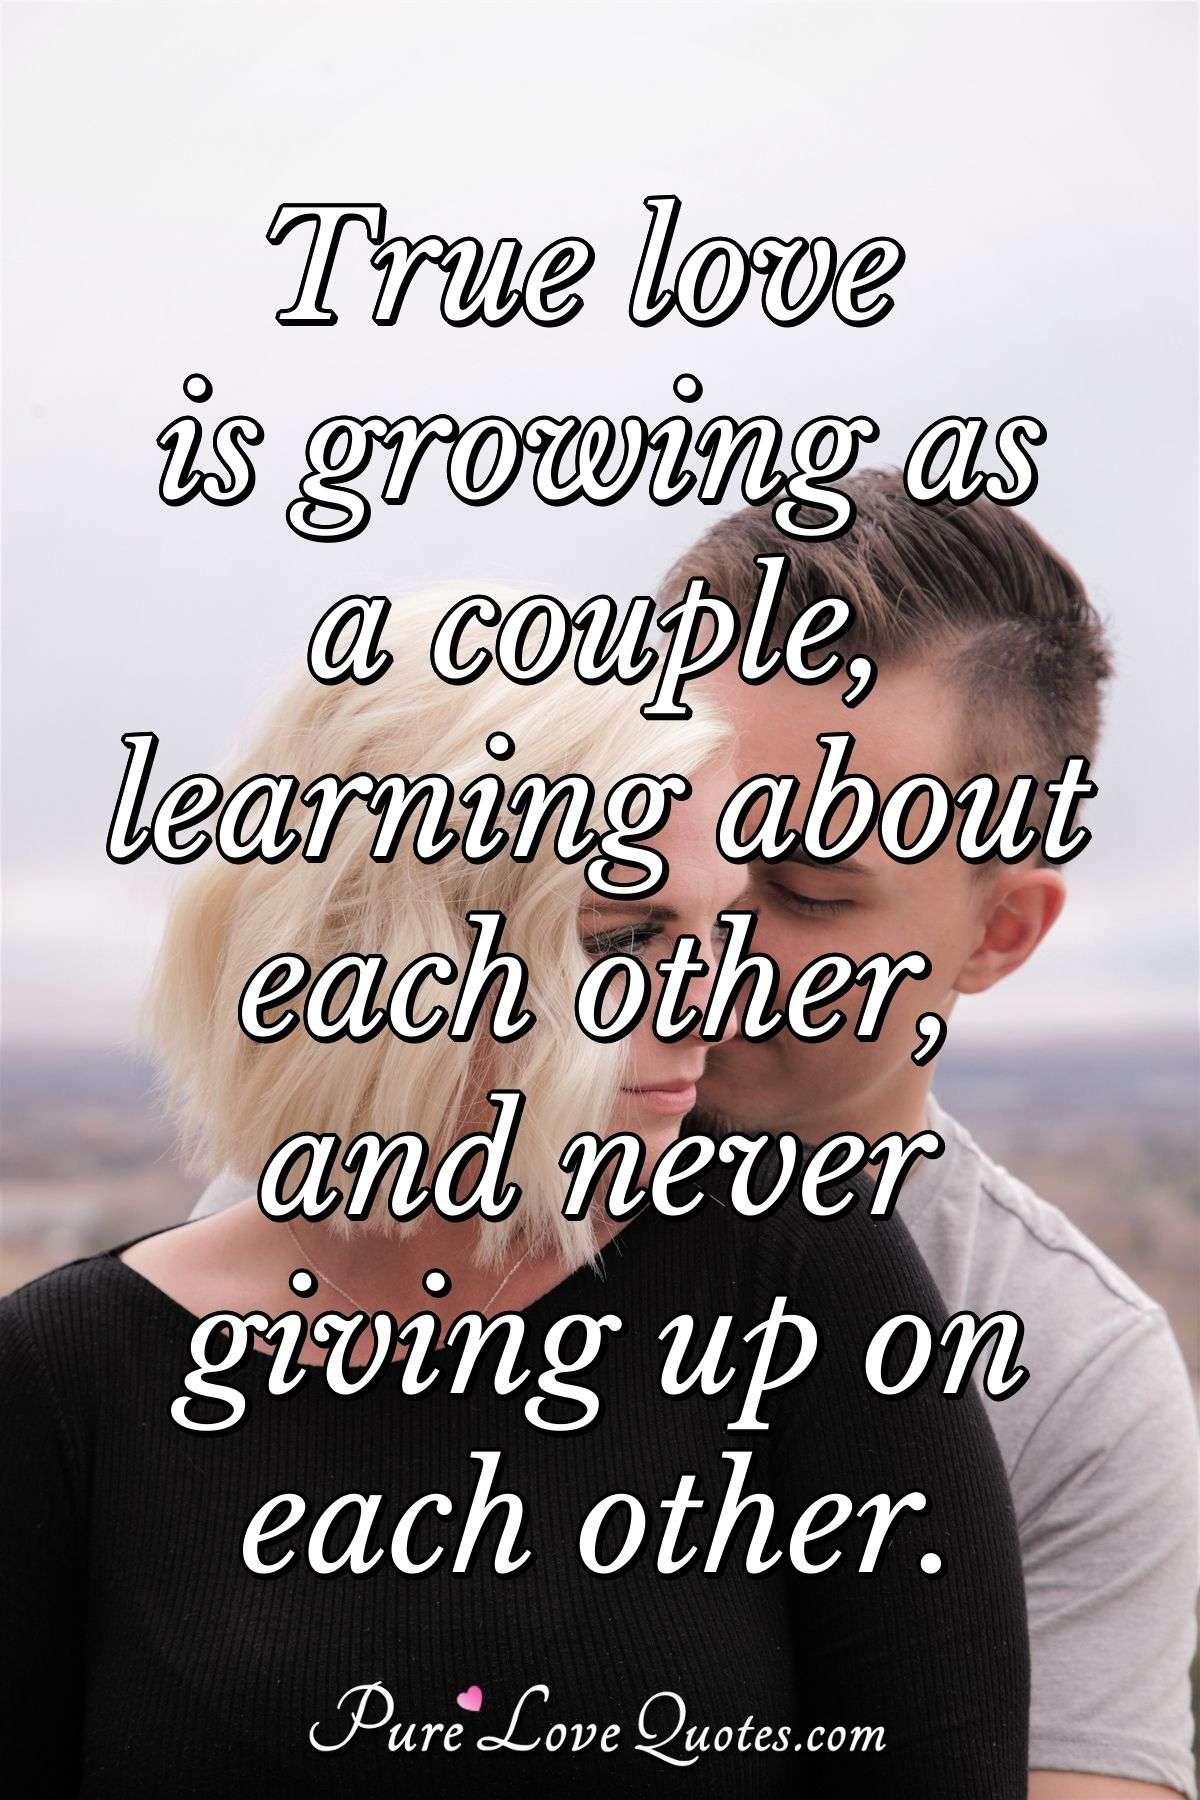  True  love  is growing as a couple  learning about each 